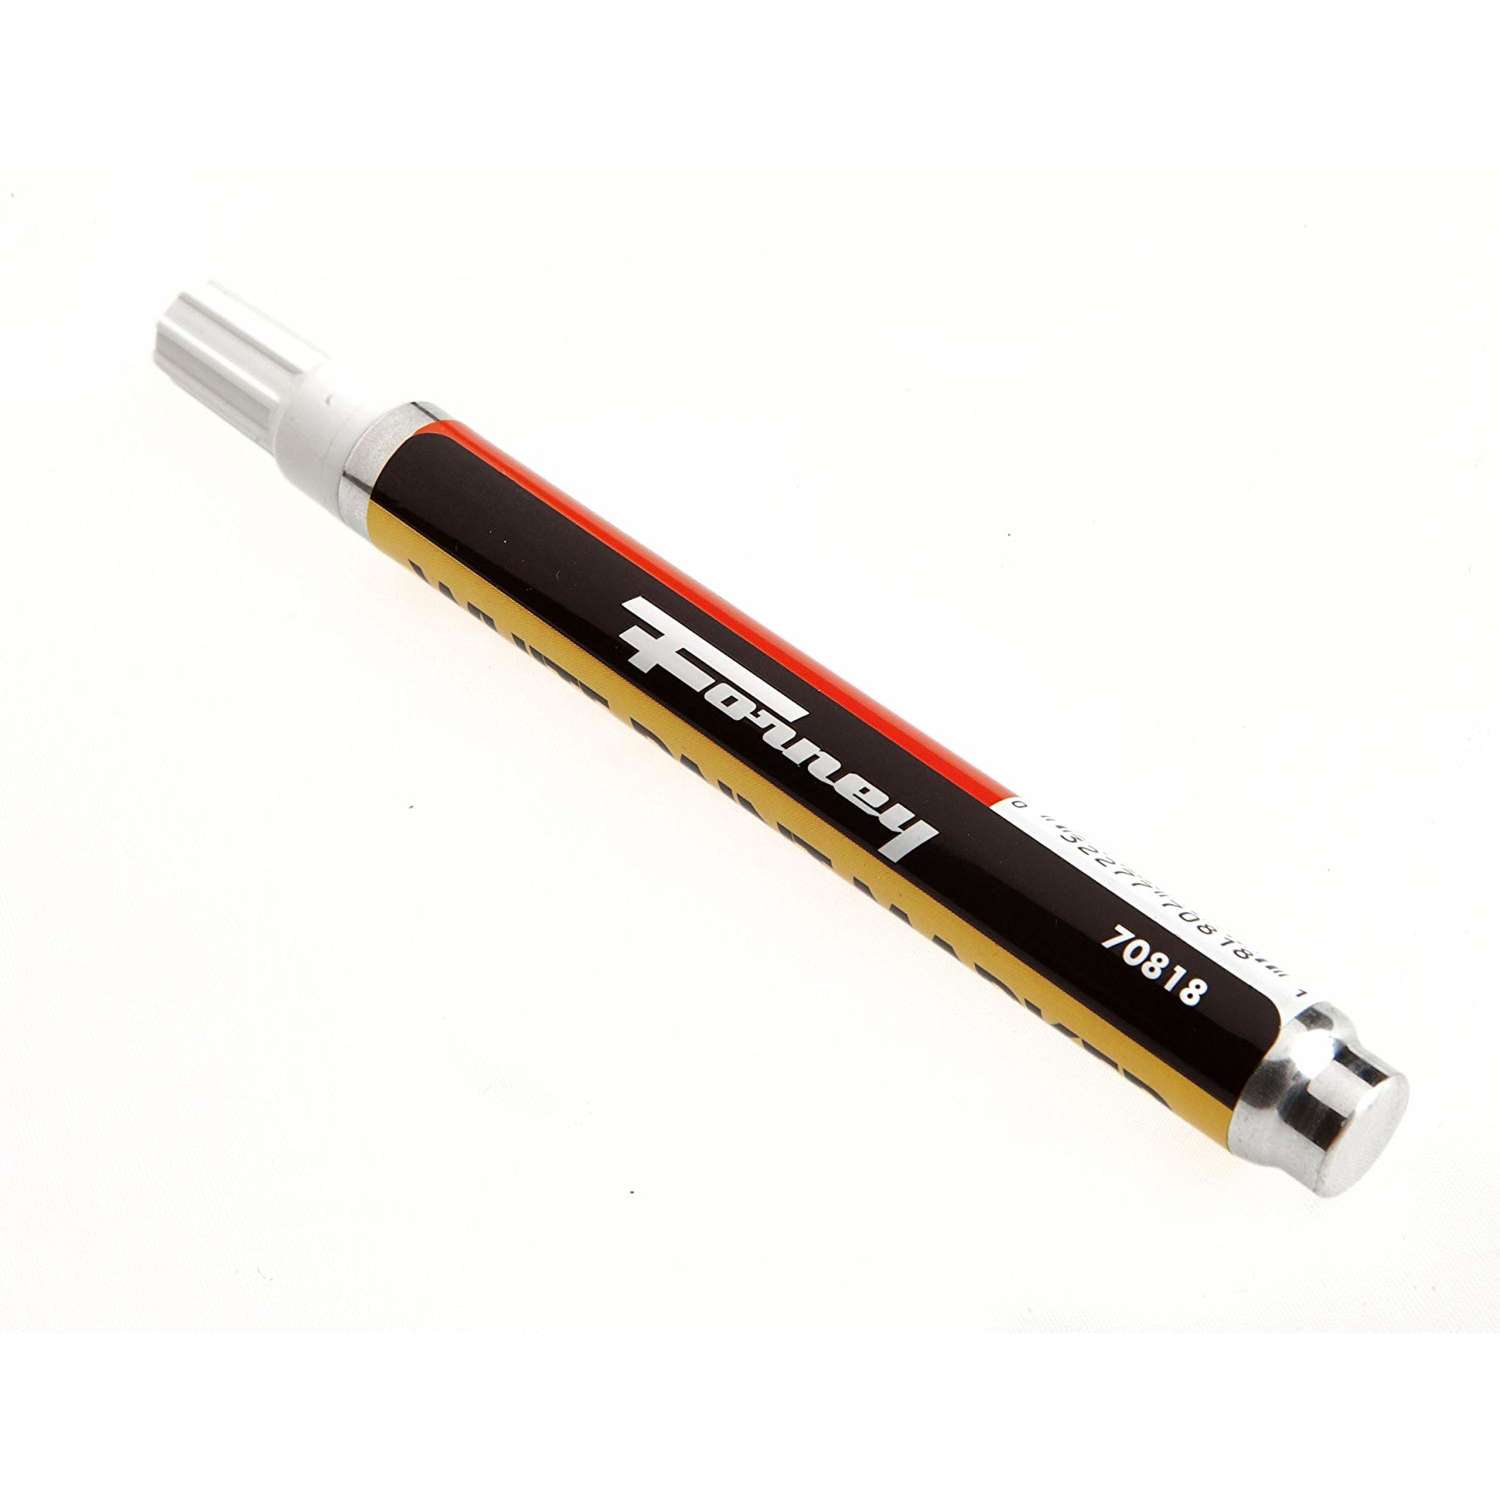 Permanent Oil-Based Paint Markers, 18 ct